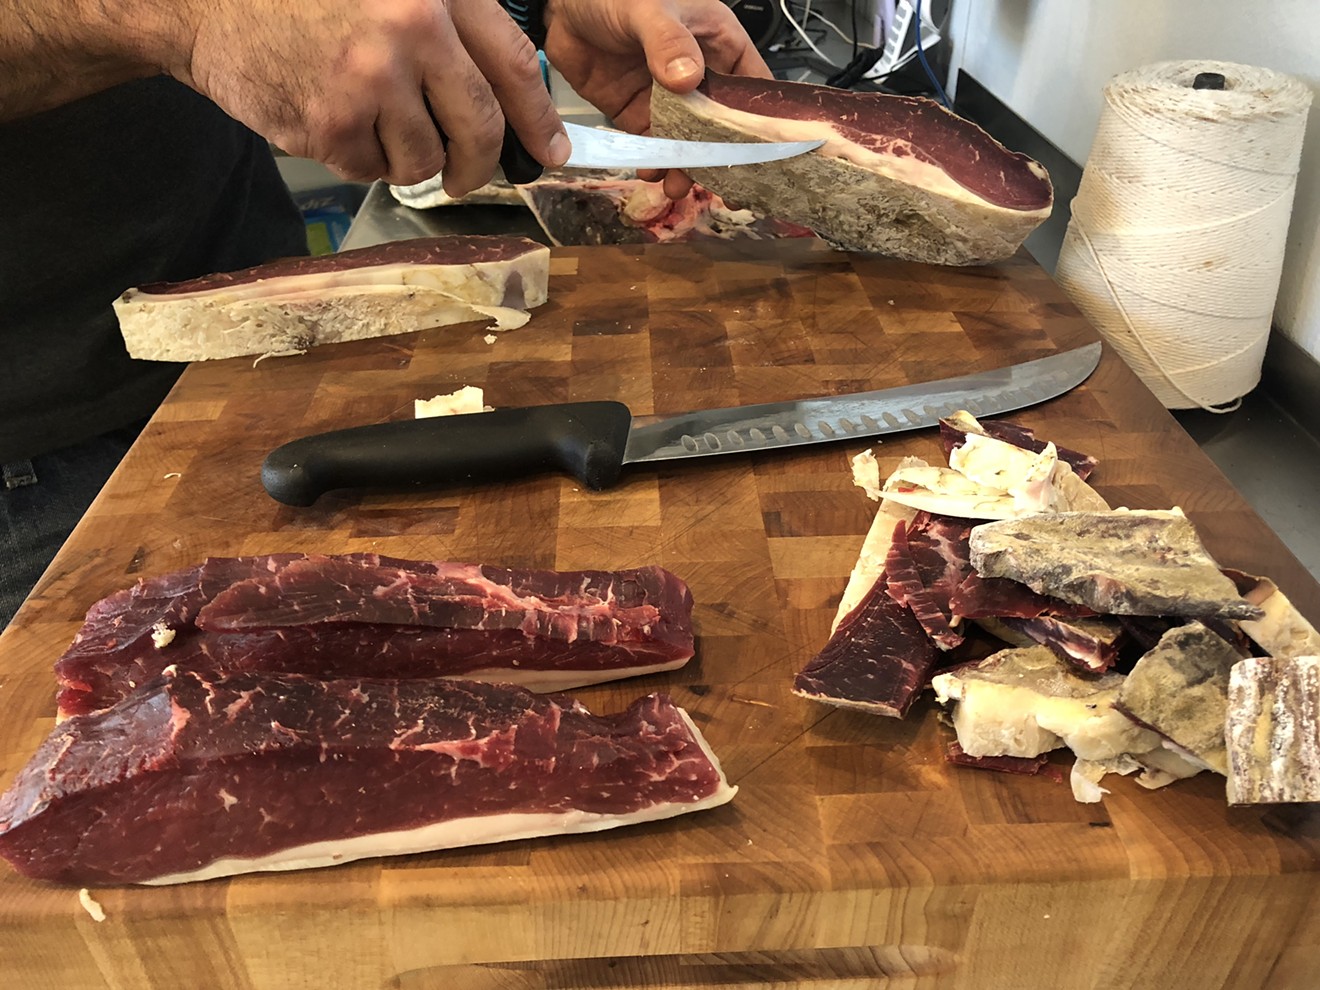 Trimming long-aged New York strip